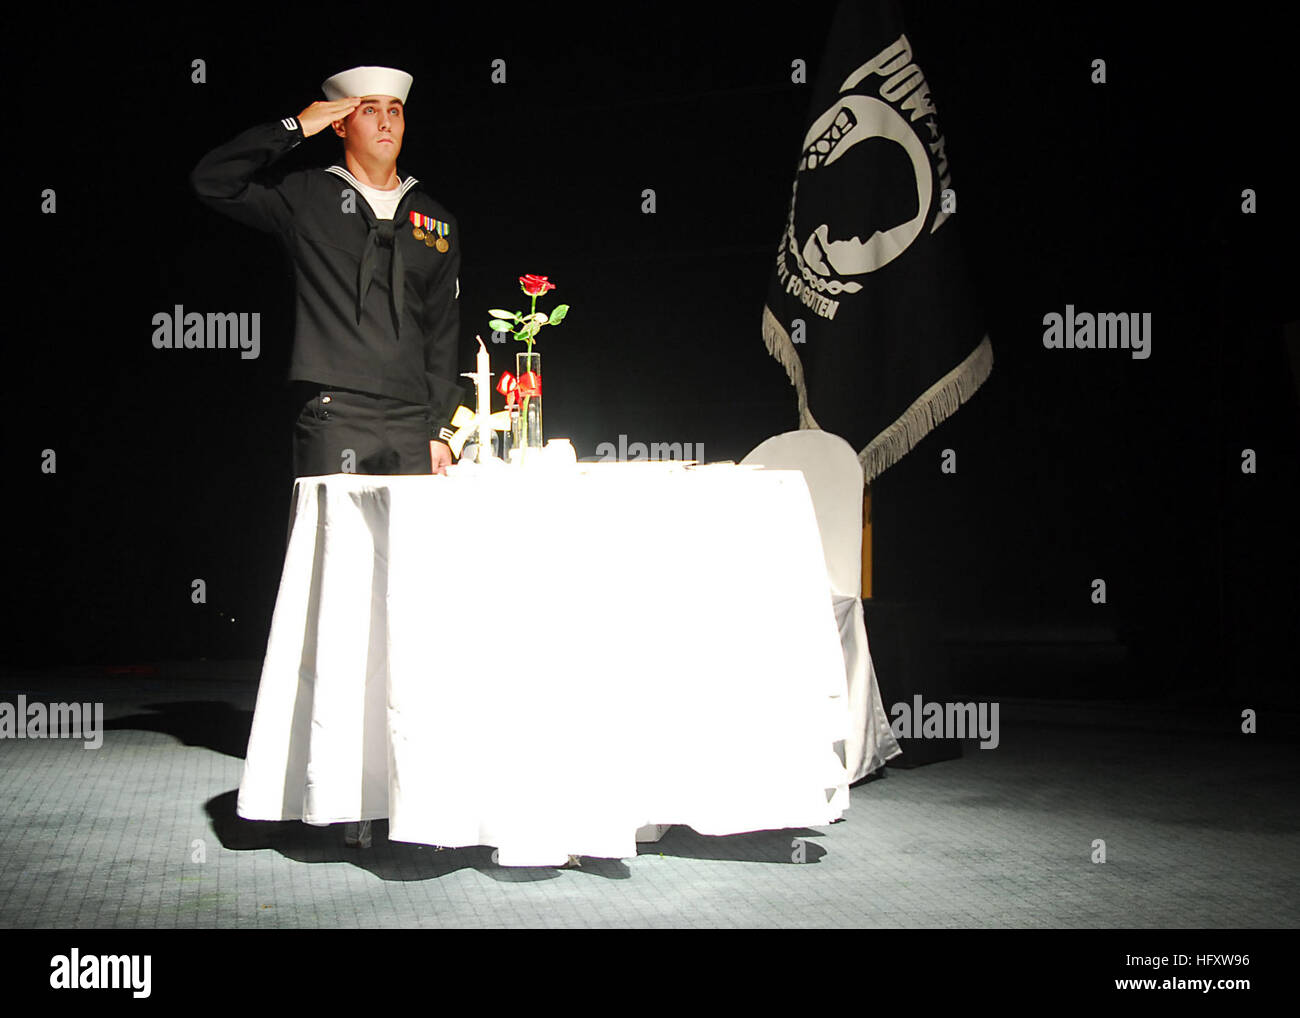 091017-N-9573A-031  SEOUL, Republic of Korea (Oct. 17, 2009) Information Systems Technician Sean Jonathan Timm, assigned to Commander, U.S. Naval Forces Korea, renders honors to the Prisoner of War/Missing in Action table during the 234th Navy Birthday Ball in Seoul, Republic of Korea. (U.S. Navy photo by Mass Communication Specialist 1st Class Bobbie G. Attaway/Released) US Navy 091017-N-9573A-031 Information Systems Technician Sean Jonathan Timm, assigned to Commander, U.S. Naval Forces Korea, renders honors to the Prisoner of War-Missing in Action table during the 234th Navy Birthday Ball i Stock Photo